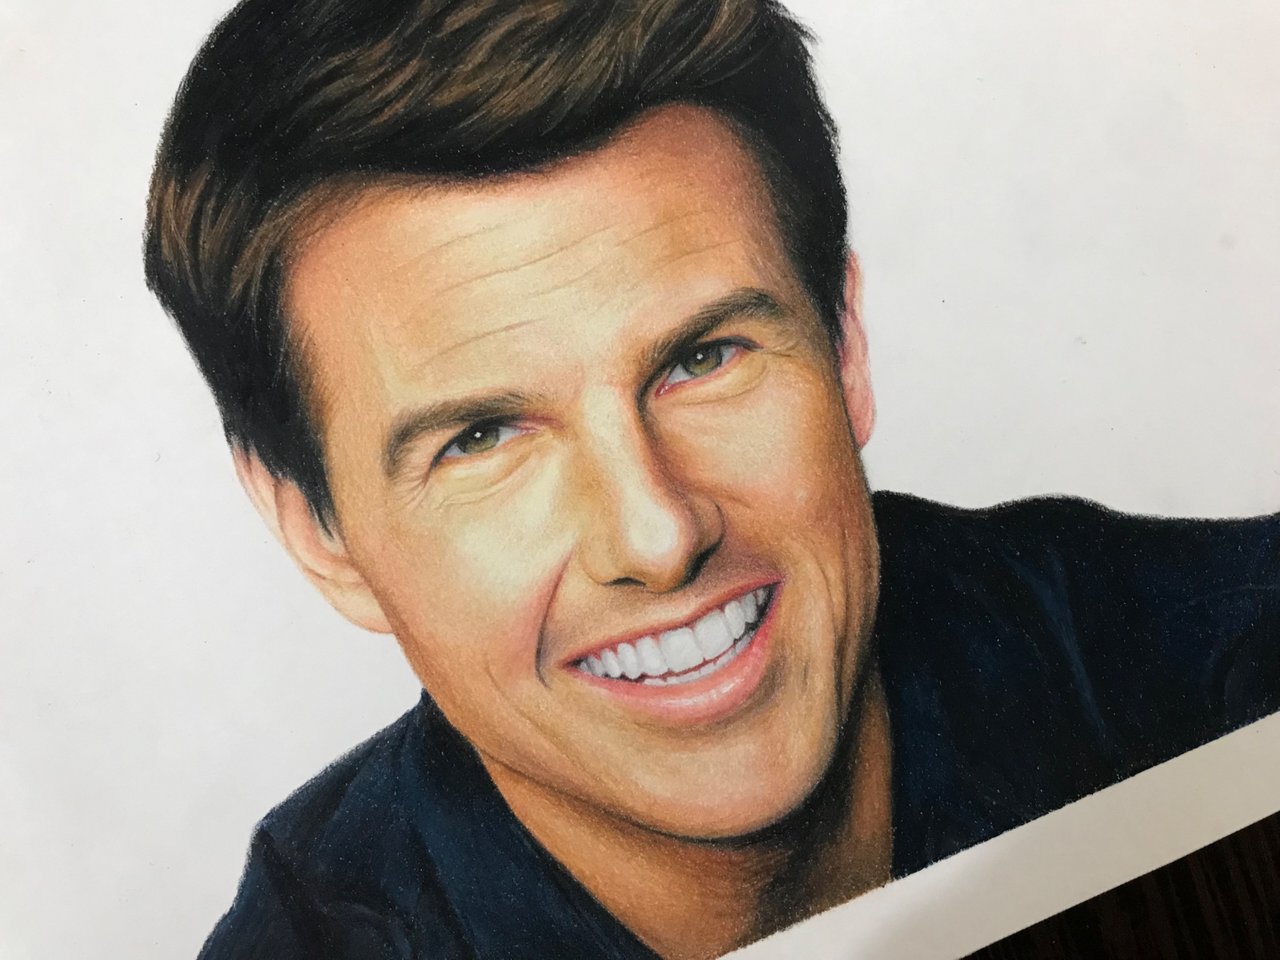 Lexica - Portrait of tom cruise, black and white, hedcut illustration  style, pencil sketch style, drawing by Noli Novakovsky